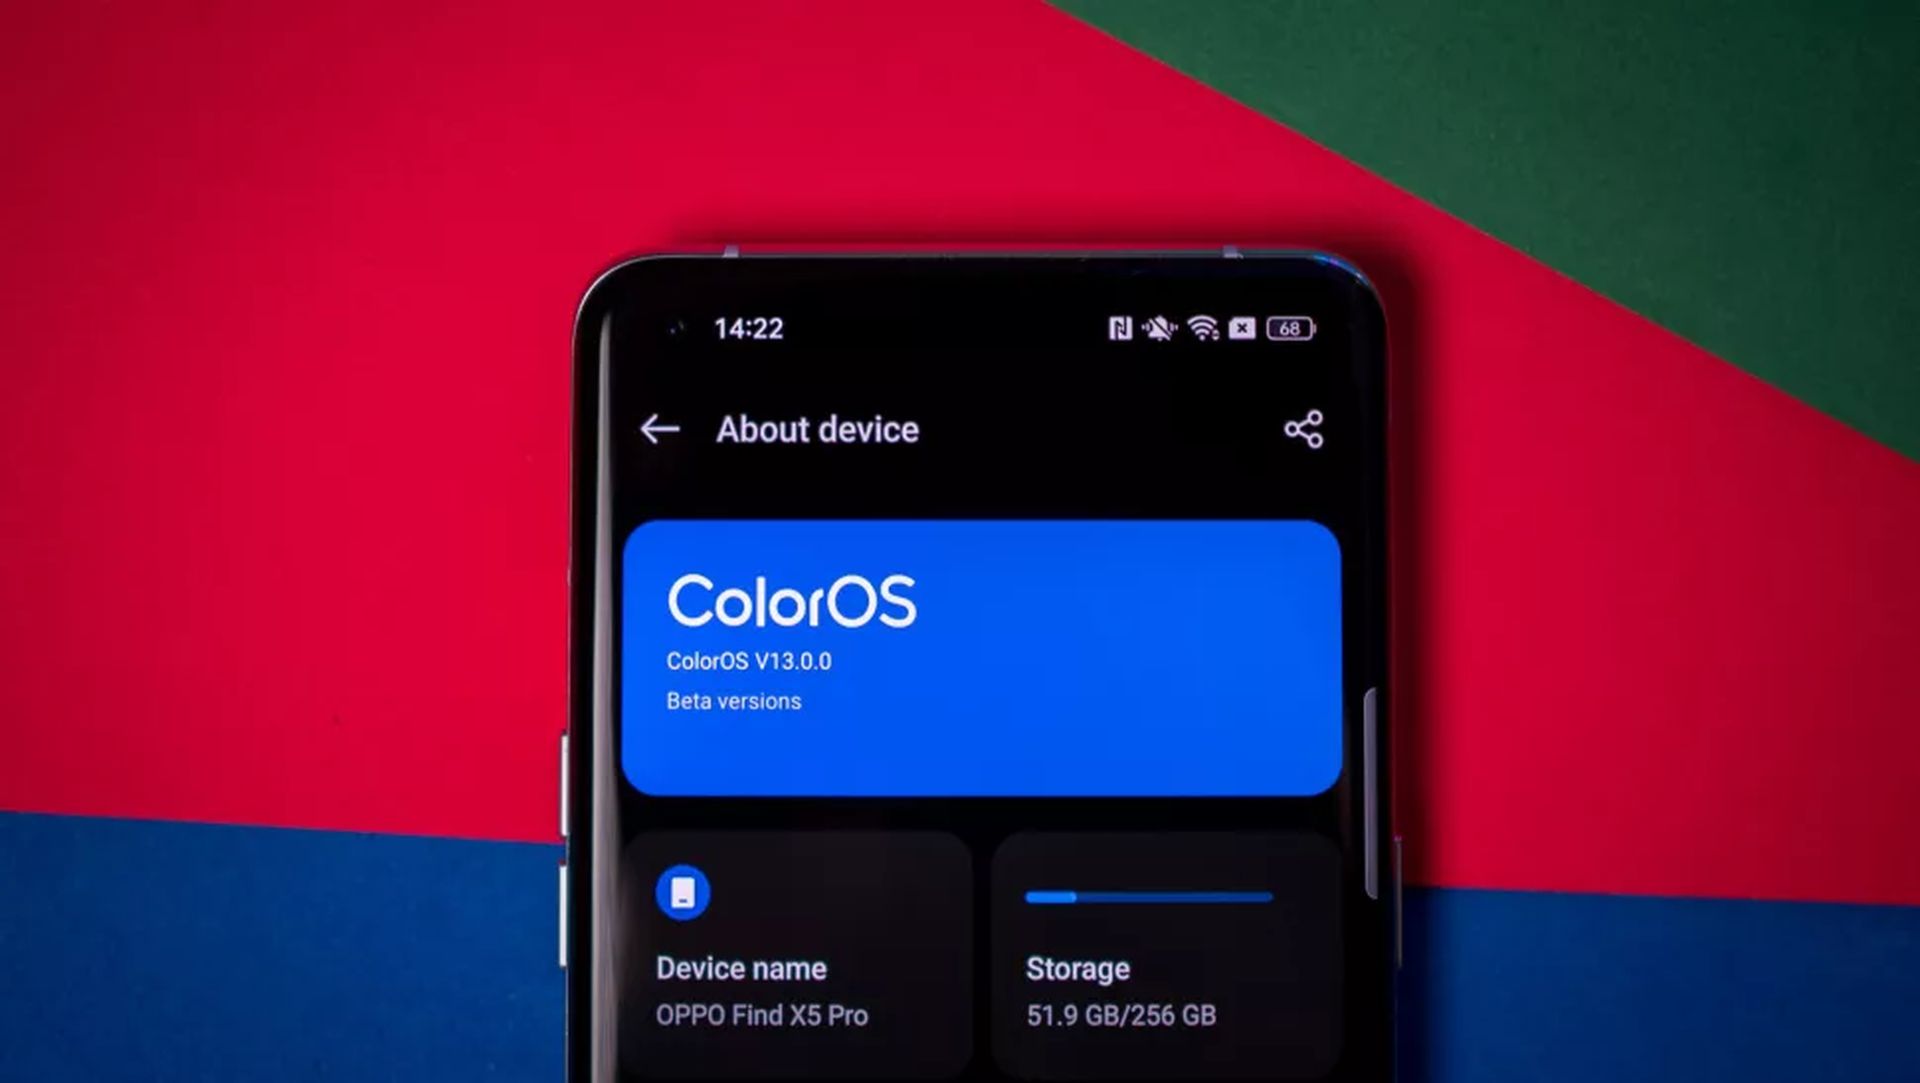 Today, we are going to be going over the new ColorOS 13 features and eligible Oppo devices, which is coming thanks to the latest stable release of Android 13.